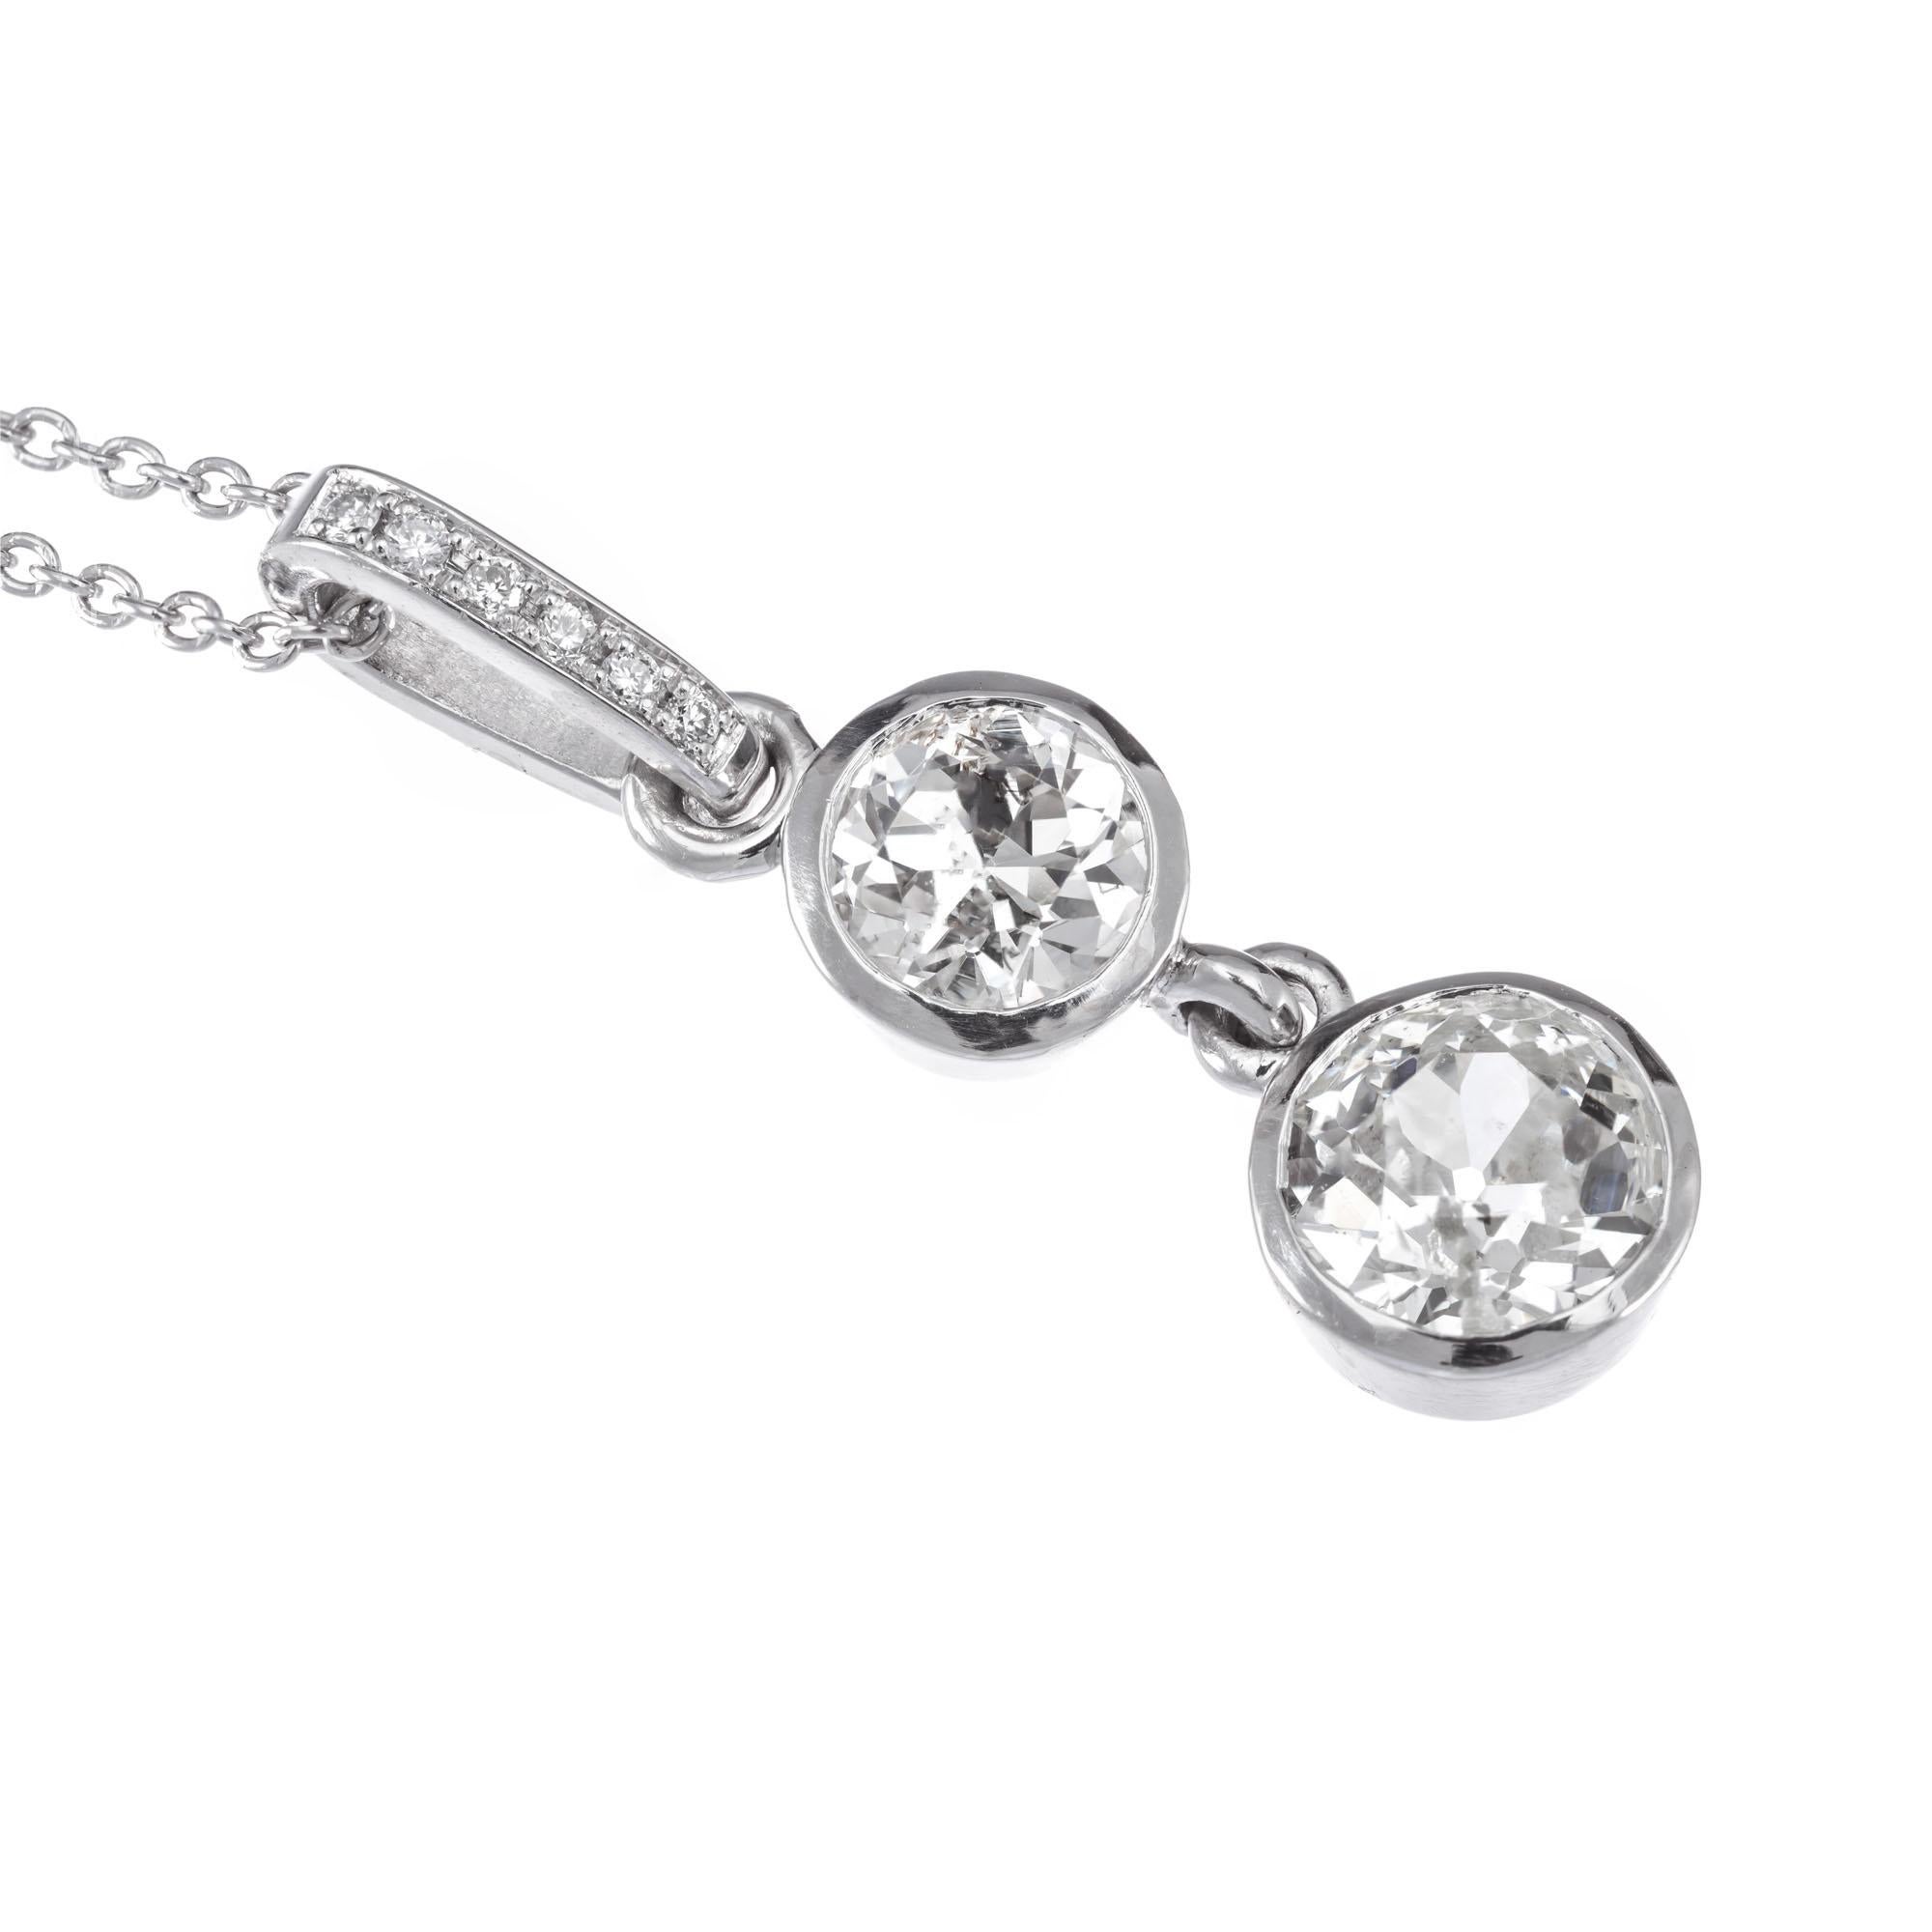 Old European double diamond dangle pendant necklace, with 6 round accent diamonds set in platinum.

1 old European cut K-L I, approx. .55ct
1 old European cut K I, approx. .35ct
6 round brilliant cut diamonds H SI, approx. .3ct
Platinum 
Stamped: